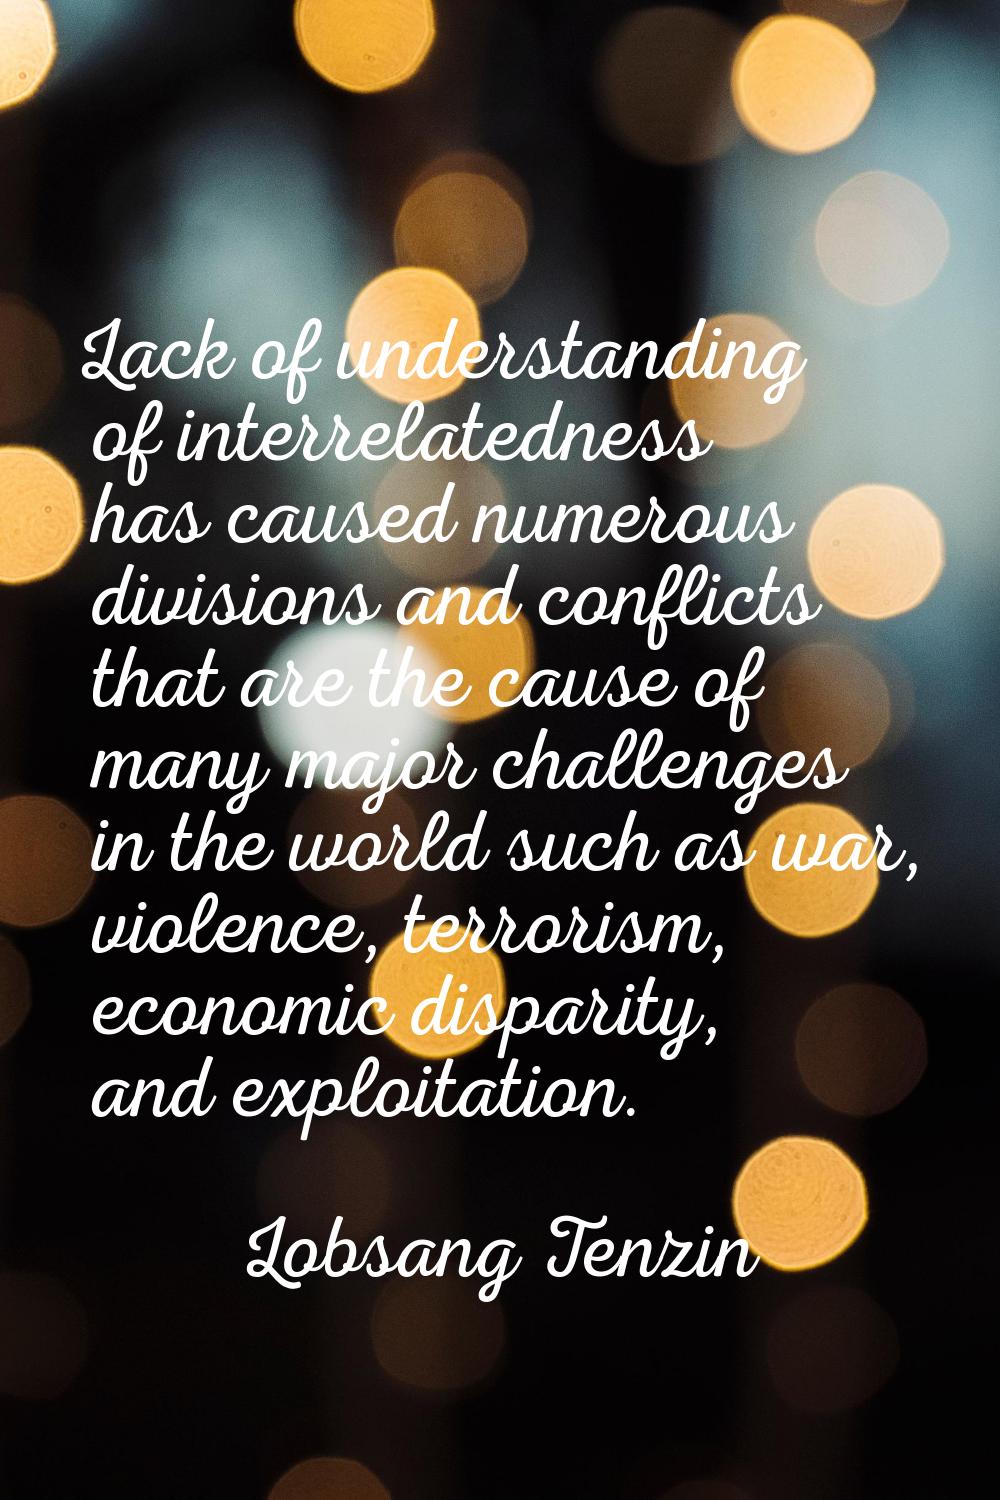 Lack of understanding of interrelatedness has caused numerous divisions and conflicts that are the 